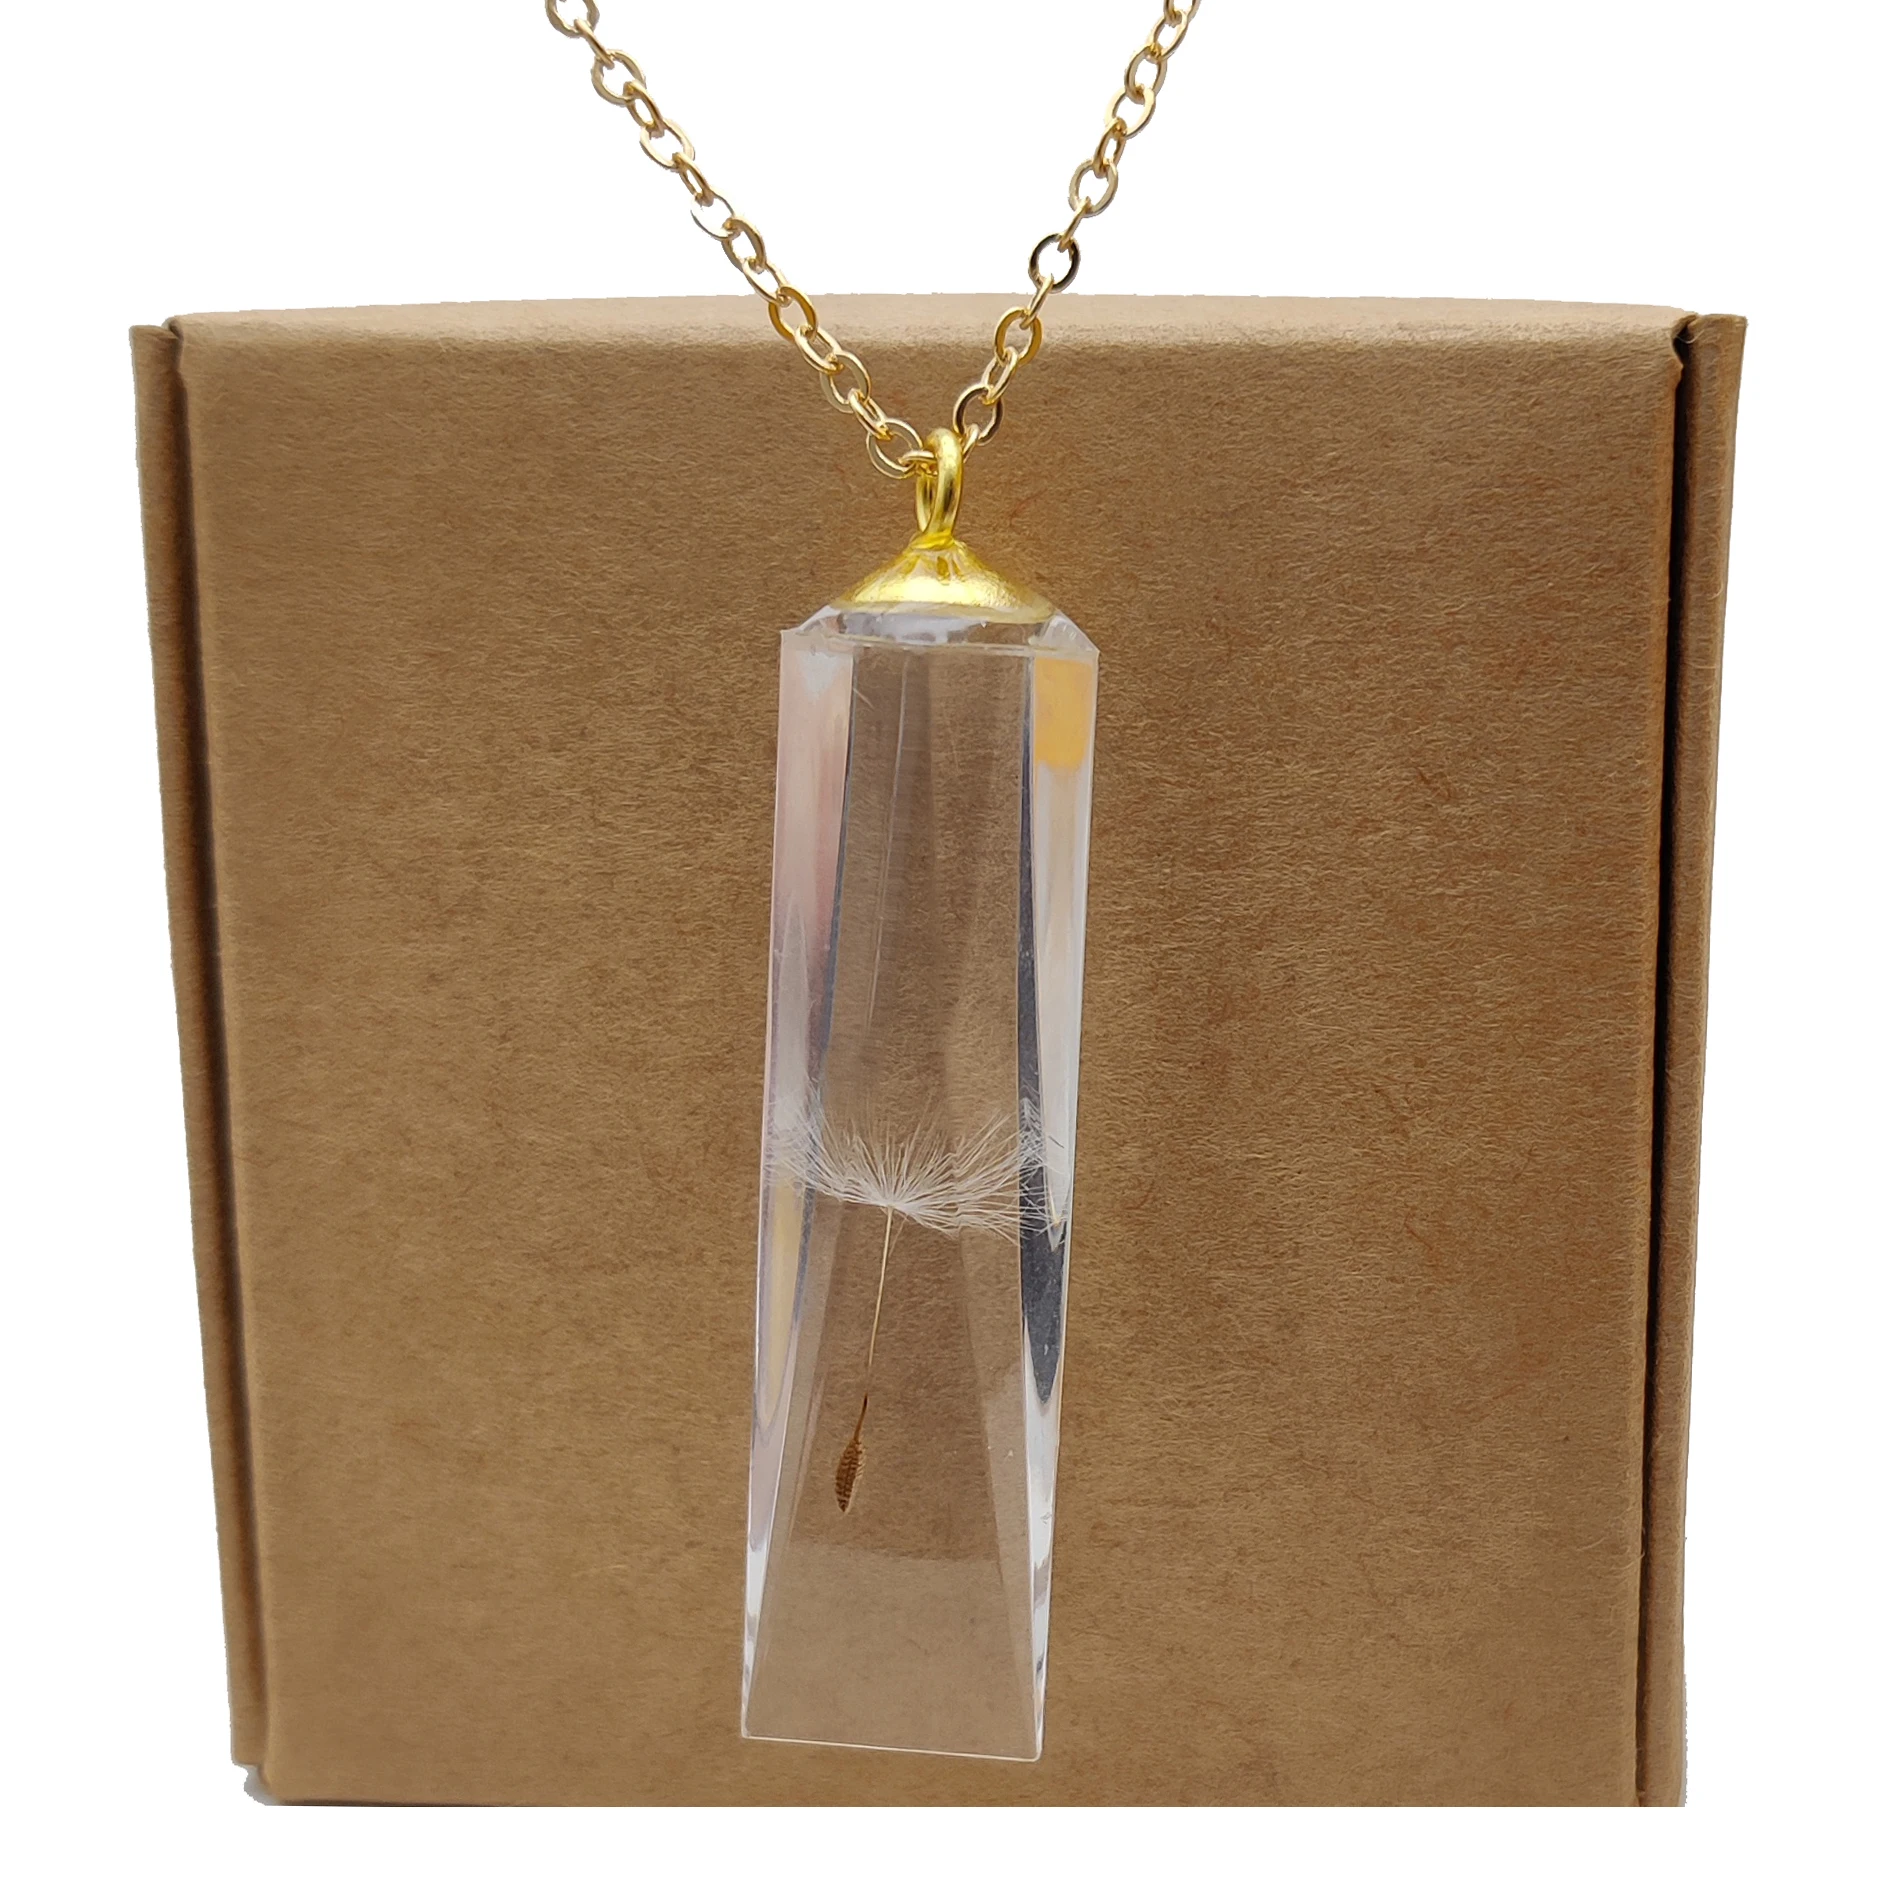 Dandelion Make a Wish Sliced Mirror Cuboid Resin Gold Color Pendant Chain Long Necklace Women Boho Jewelry Bohemian Handmade 10pcs make a wish card earrings and necklaces display cards cardboard packaging hang tag ear studs paper card for jewelry 9x7cm